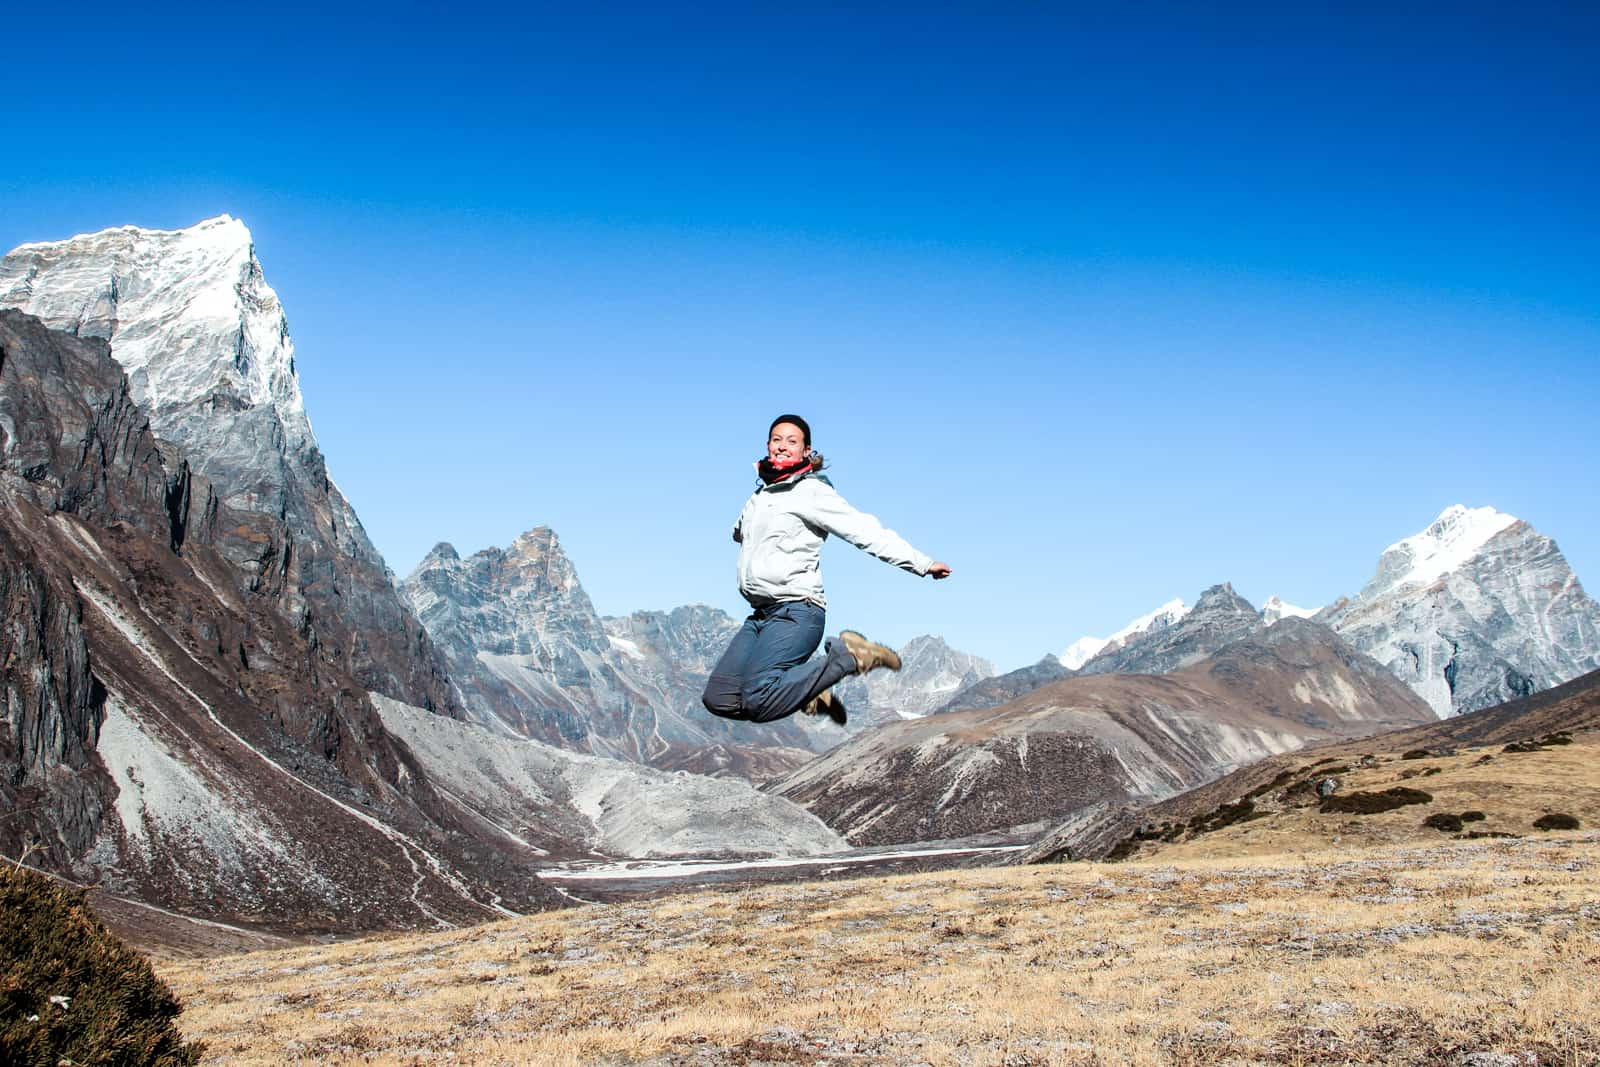 A woman in trekking gear jumps high to a background of rugged, pointed snow-capped mountain vistas on the Everest Base Camp trek